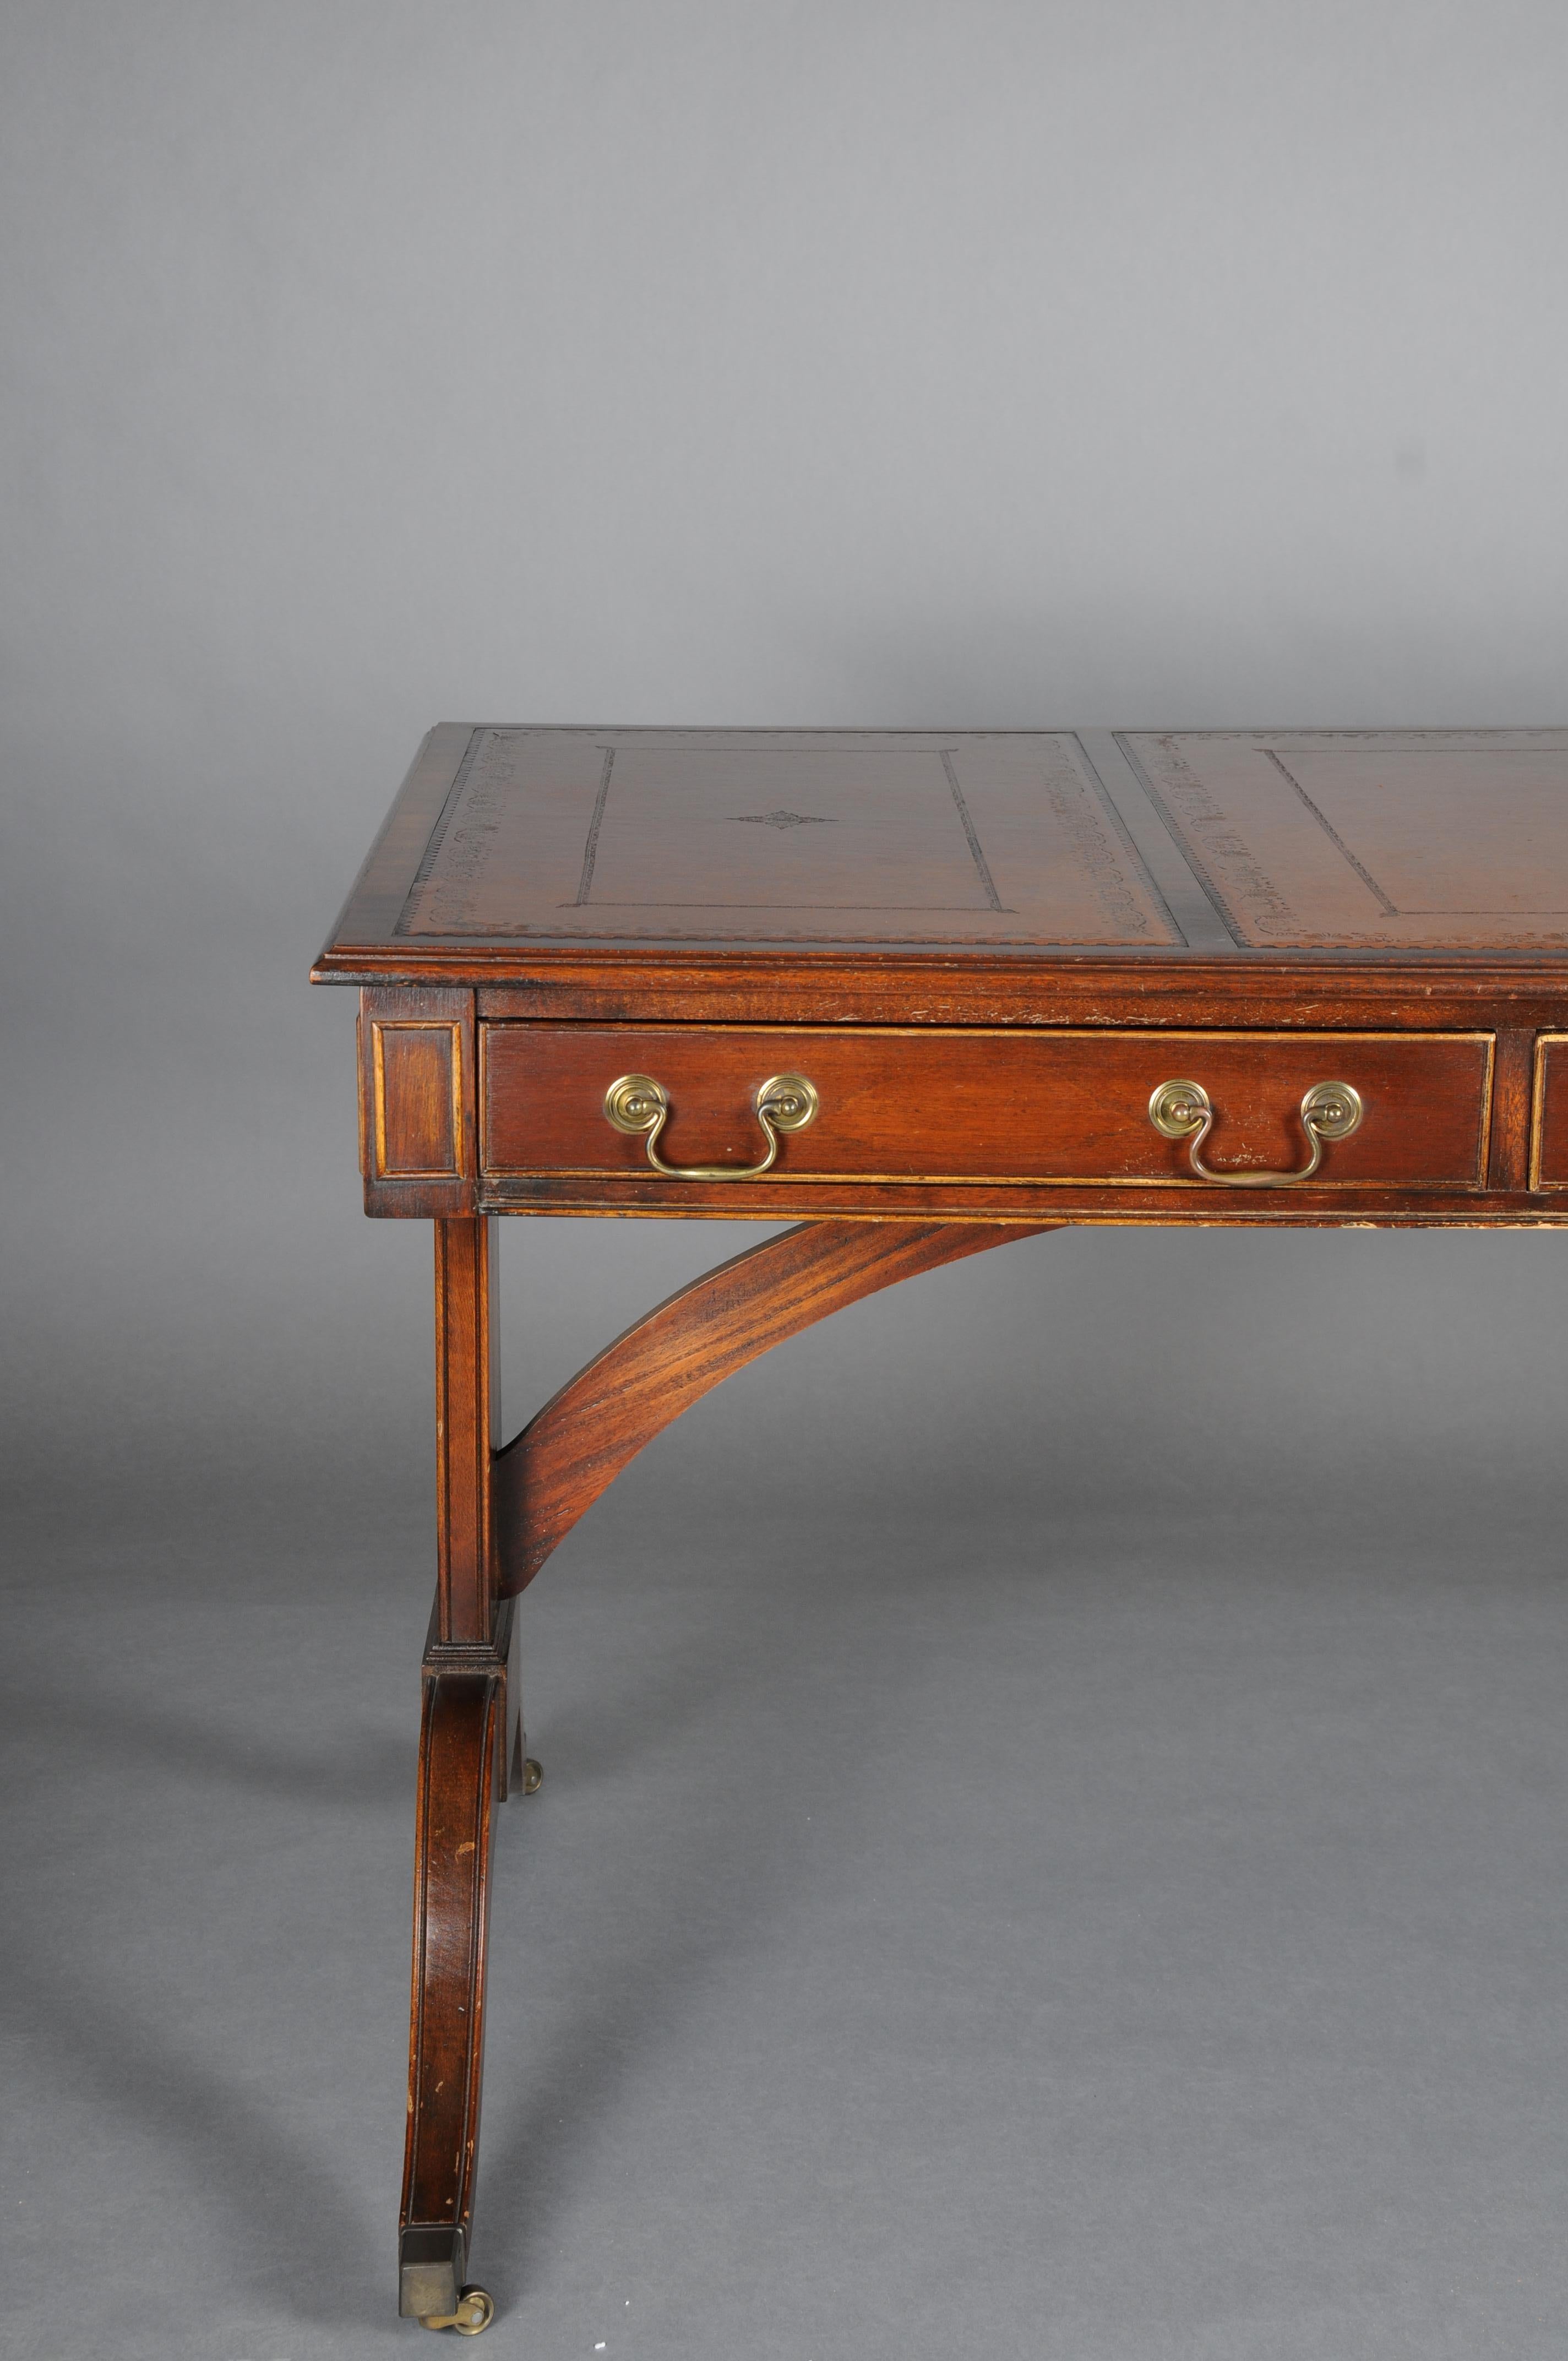 Great English partner desk, desk 1870, mahogany

Solid mahogany, partially veneered. Three-drawer frame profiled on both sides, slightly protruding table top. Writing surface decorated with unusual gold embossing. Decorative brass fittings. Curved